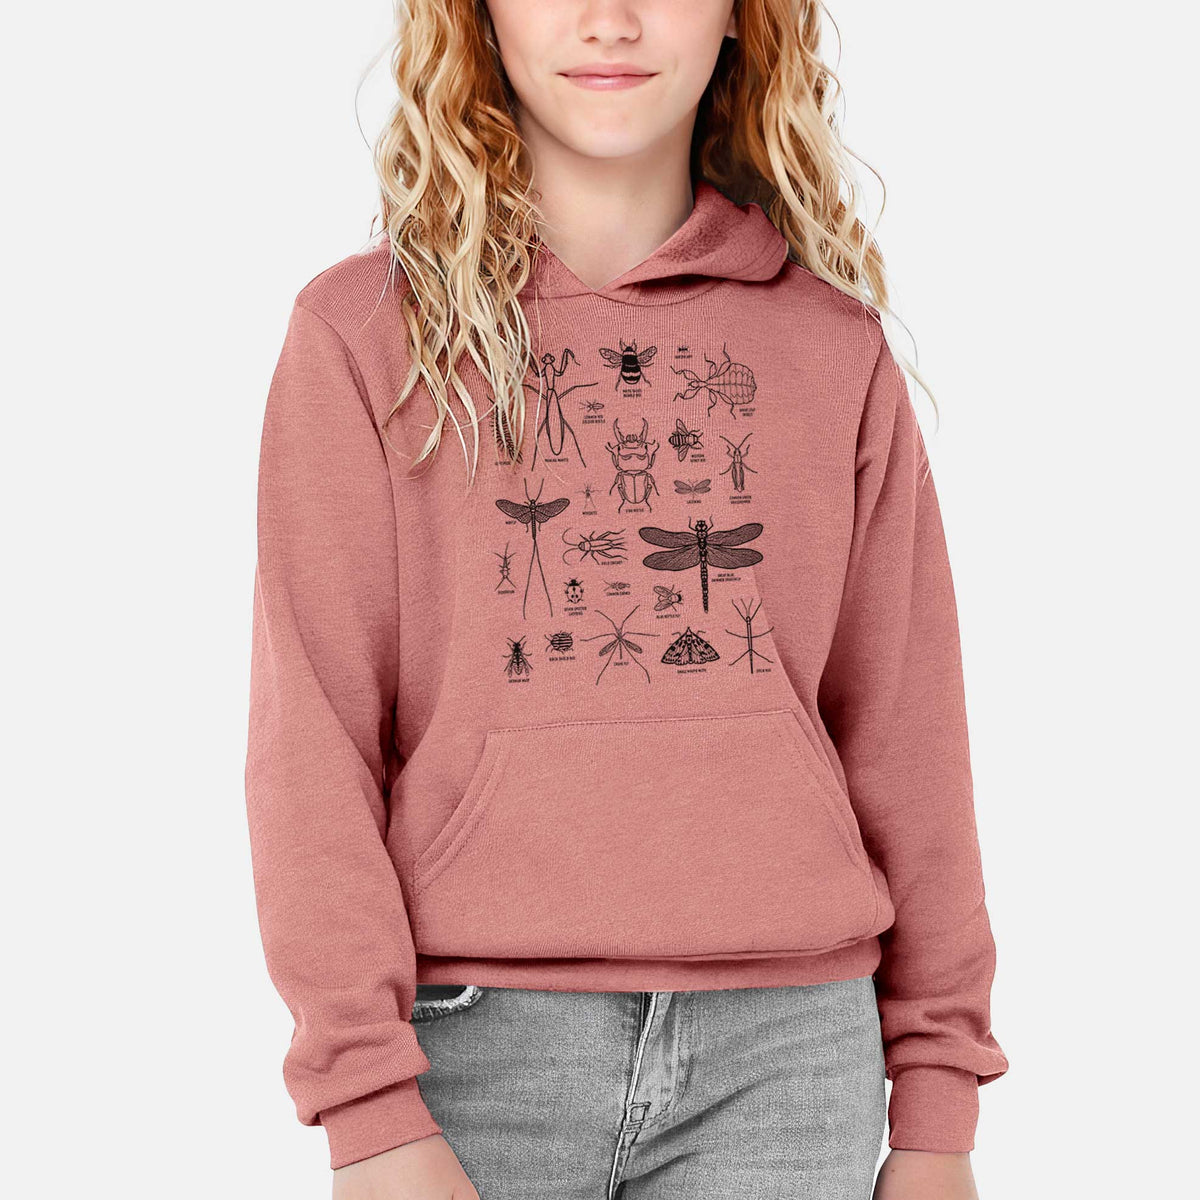 Chart of Arthropods/Insects - Youth Hoodie Sweatshirt